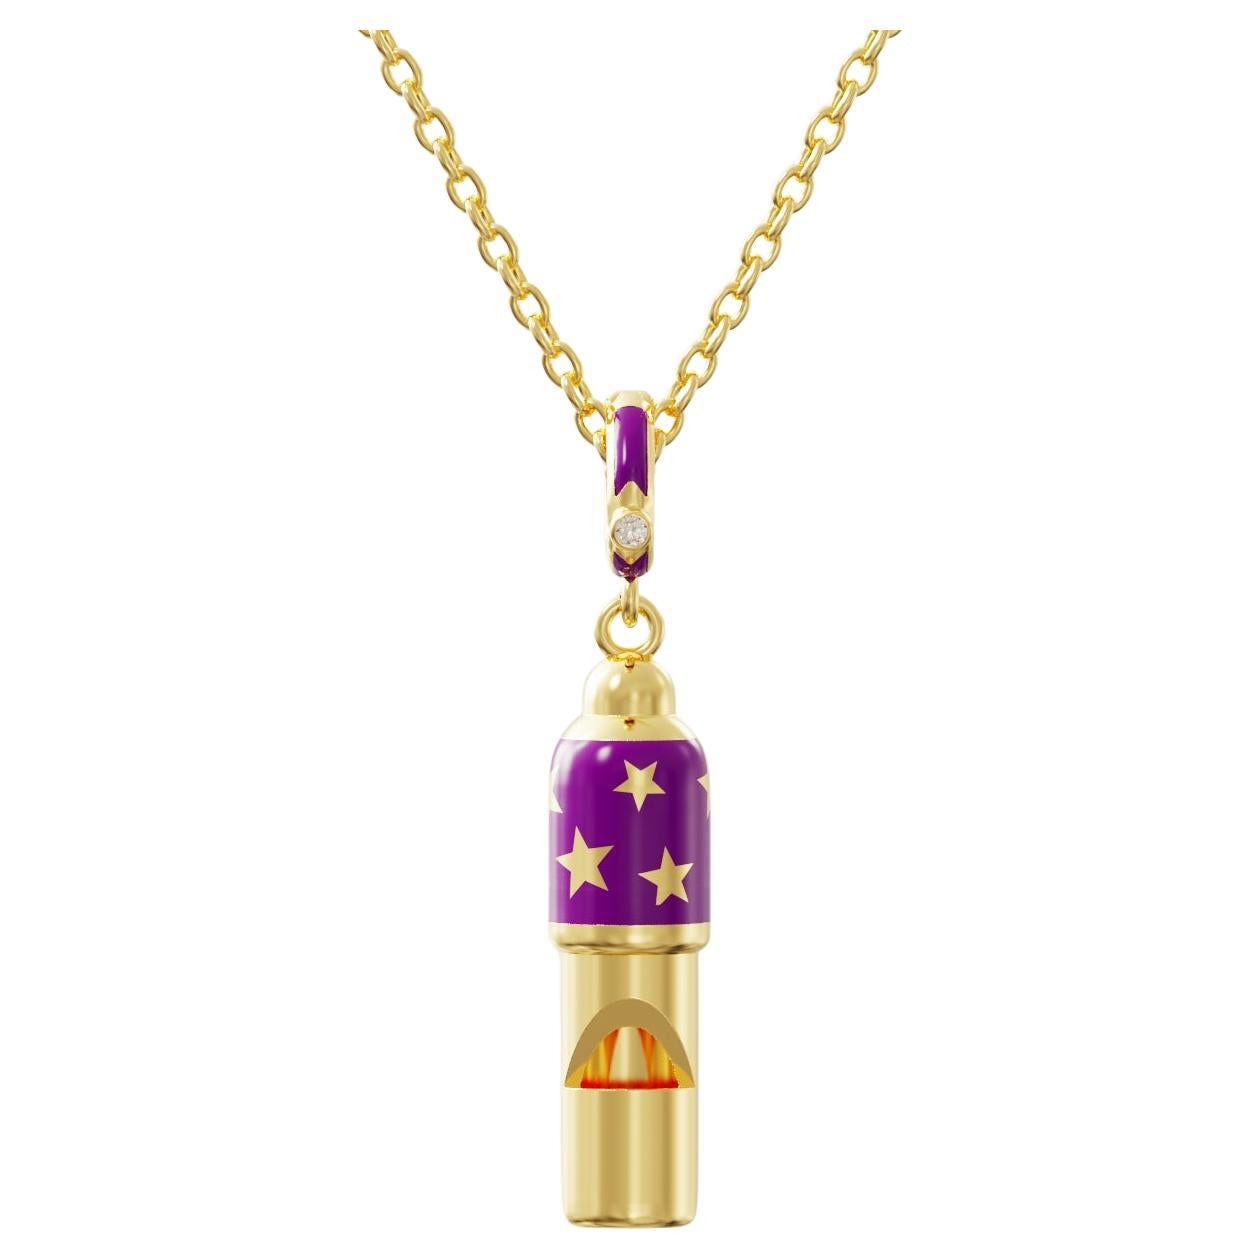 Naimah Small Gold Whistle Pendant Necklace, Purple Enamel For Sale